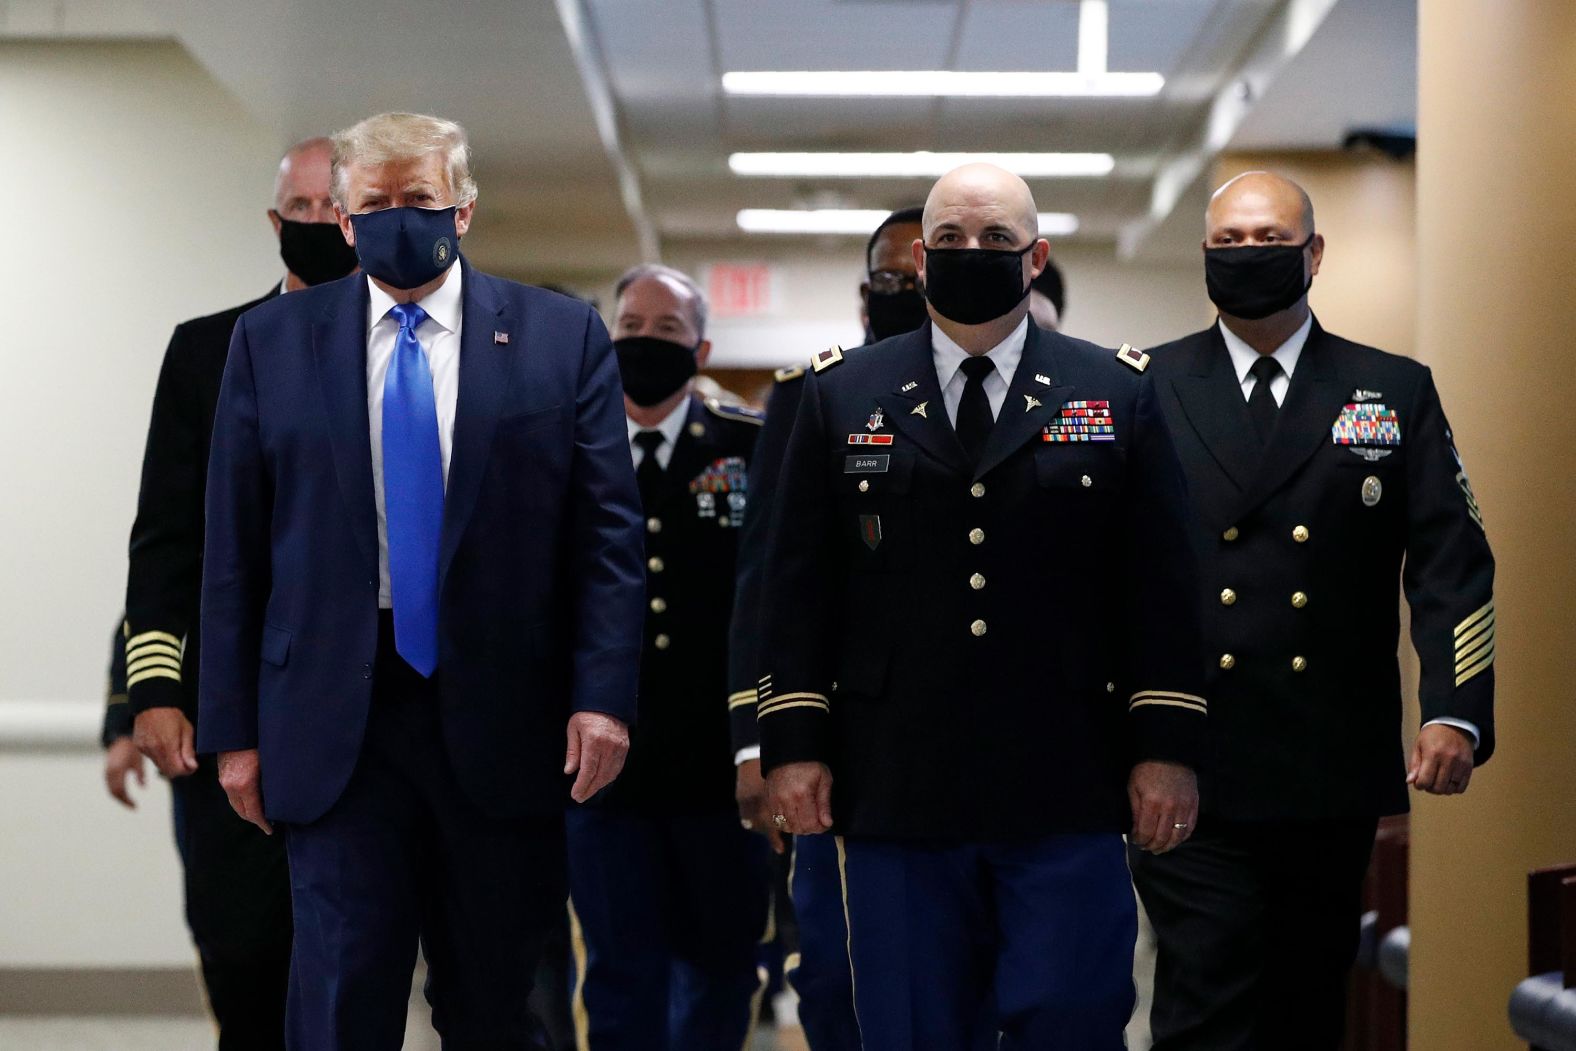 Trump wears a face mask in July 2020 as <a href="index.php?page=&url=https%3A%2F%2Fwww.cnn.com%2F2020%2F07%2F11%2Fpolitics%2Ftrump-walter-reed-visit-mask%2Findex.html" target="_blank">he visits the Walter Reed National Military Medical Center</a> in Bethesda, Maryland. This was the first time since the pandemic began that the White House press corps got a glimpse of Trump with a face covering.